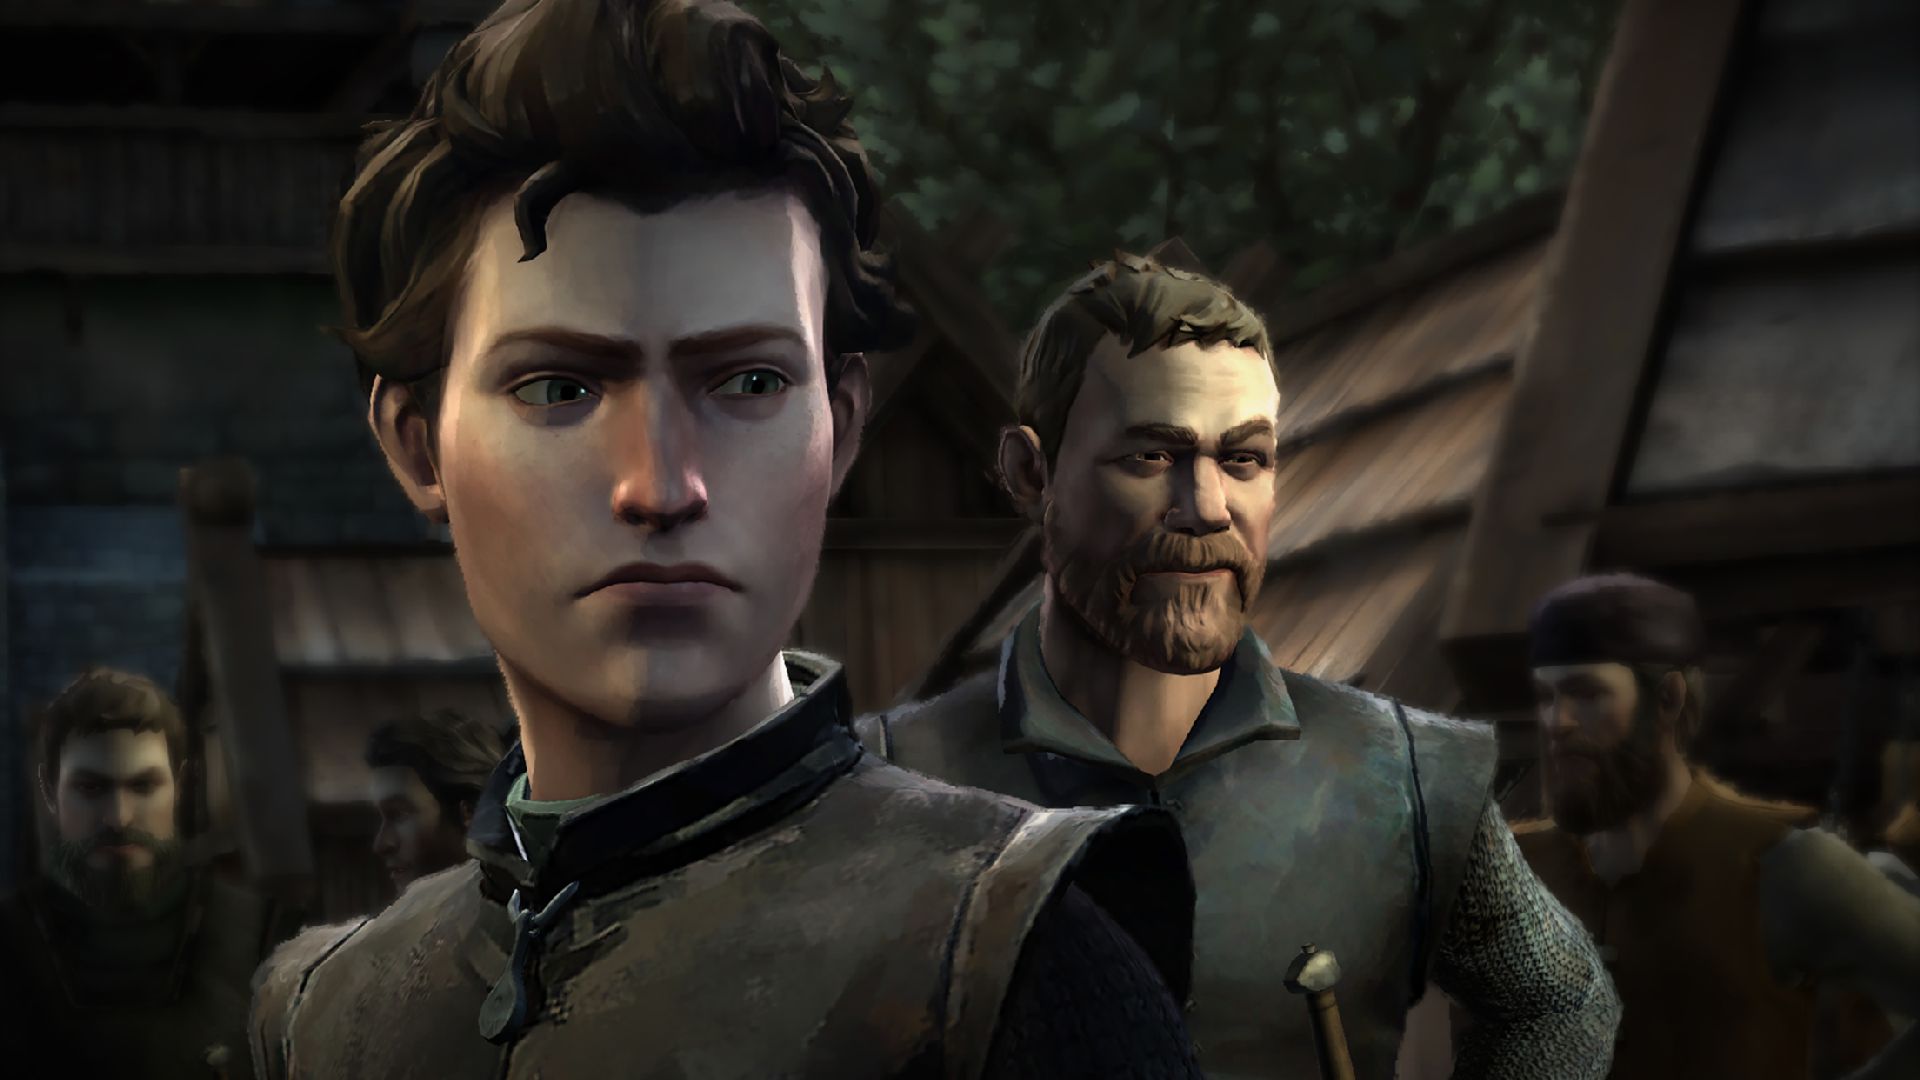 TellTale’s “Game of Thrones: Iron From Ice”